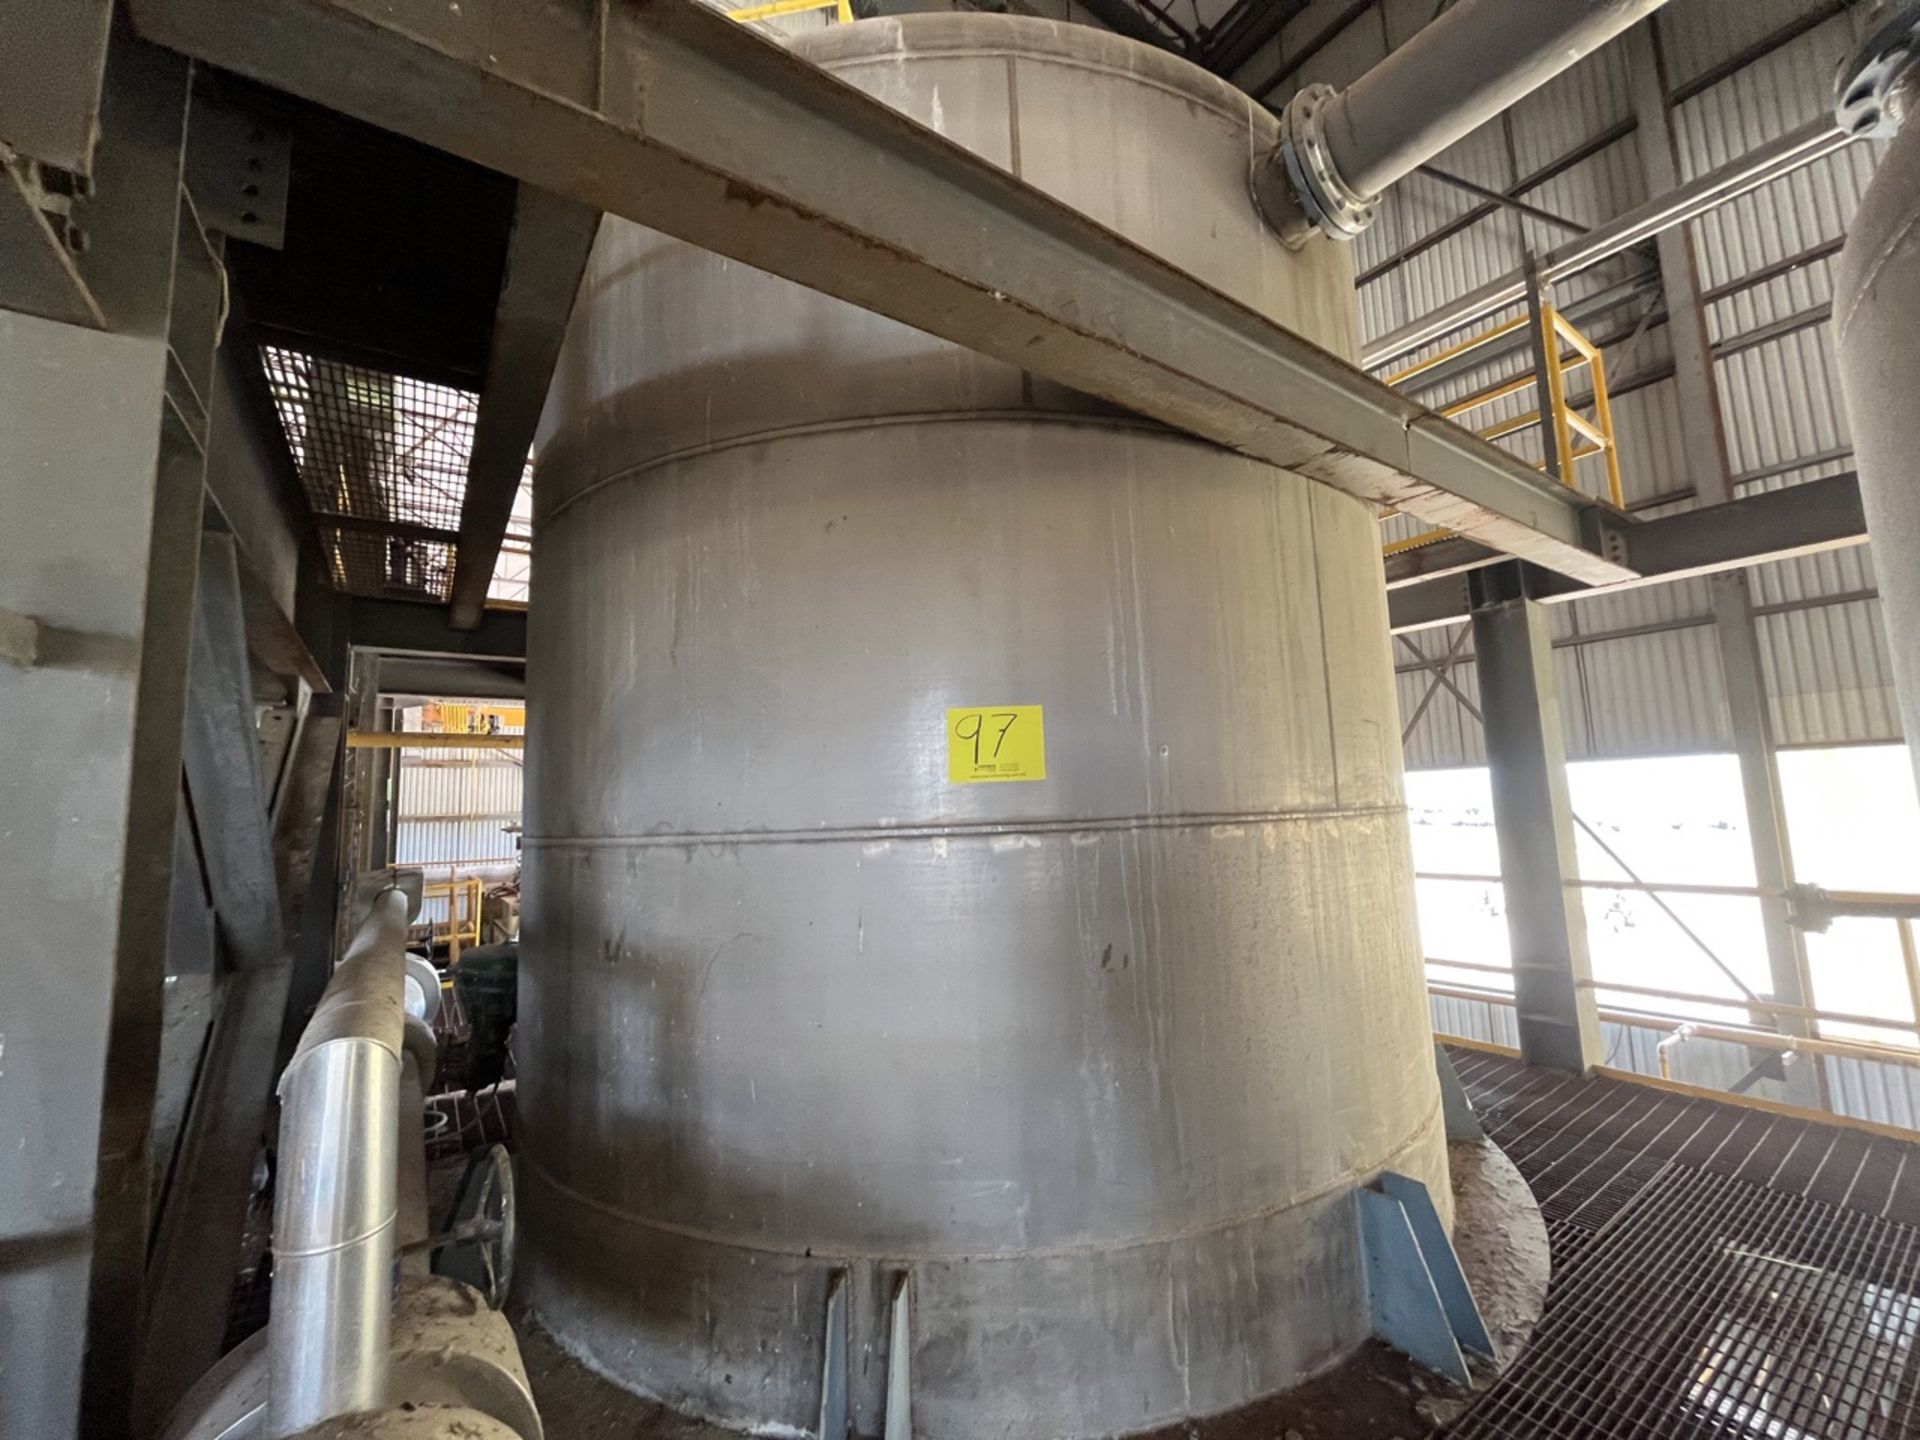 Conical storage tank with stainless steel toriesferica lid measures approximately 4.30 meters in di - Image 2 of 37